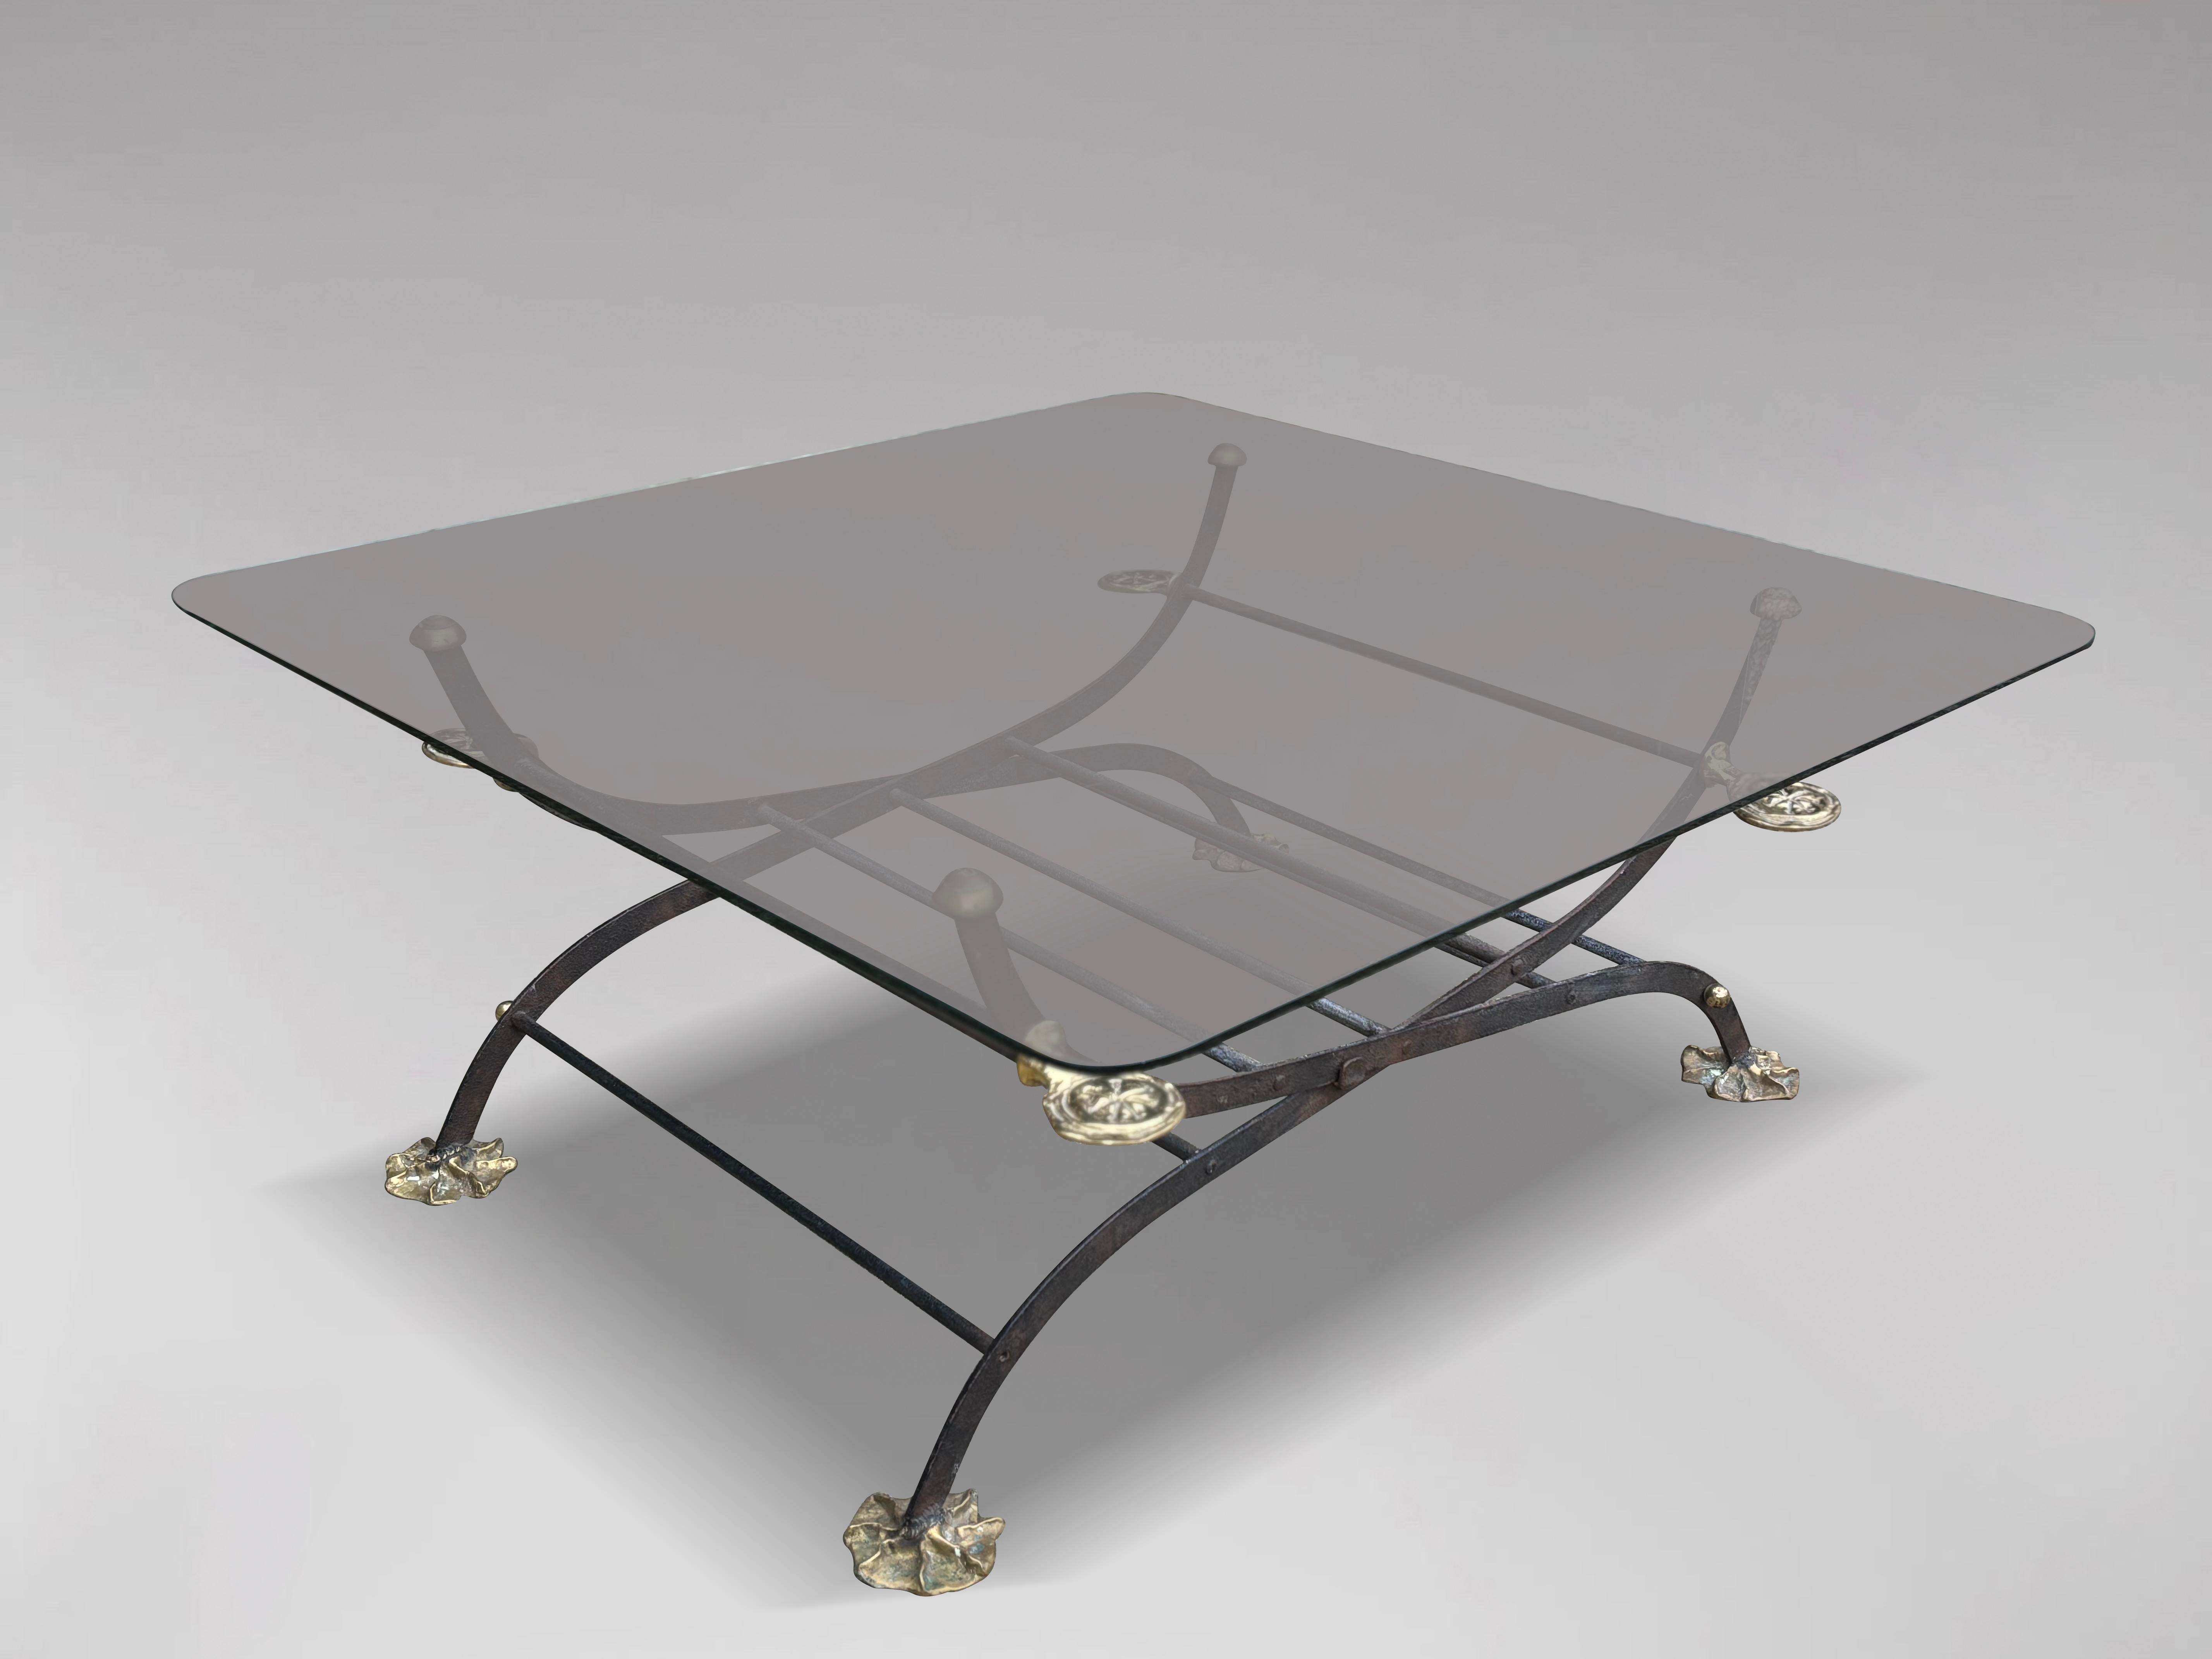 A large square coffee table by David Marshall, comprising a wrought iron folding base with bronze bases and carved brass additions below a square glass top. Extraordinary design, all original and signed with monogram.

The dimensions are:
Height: